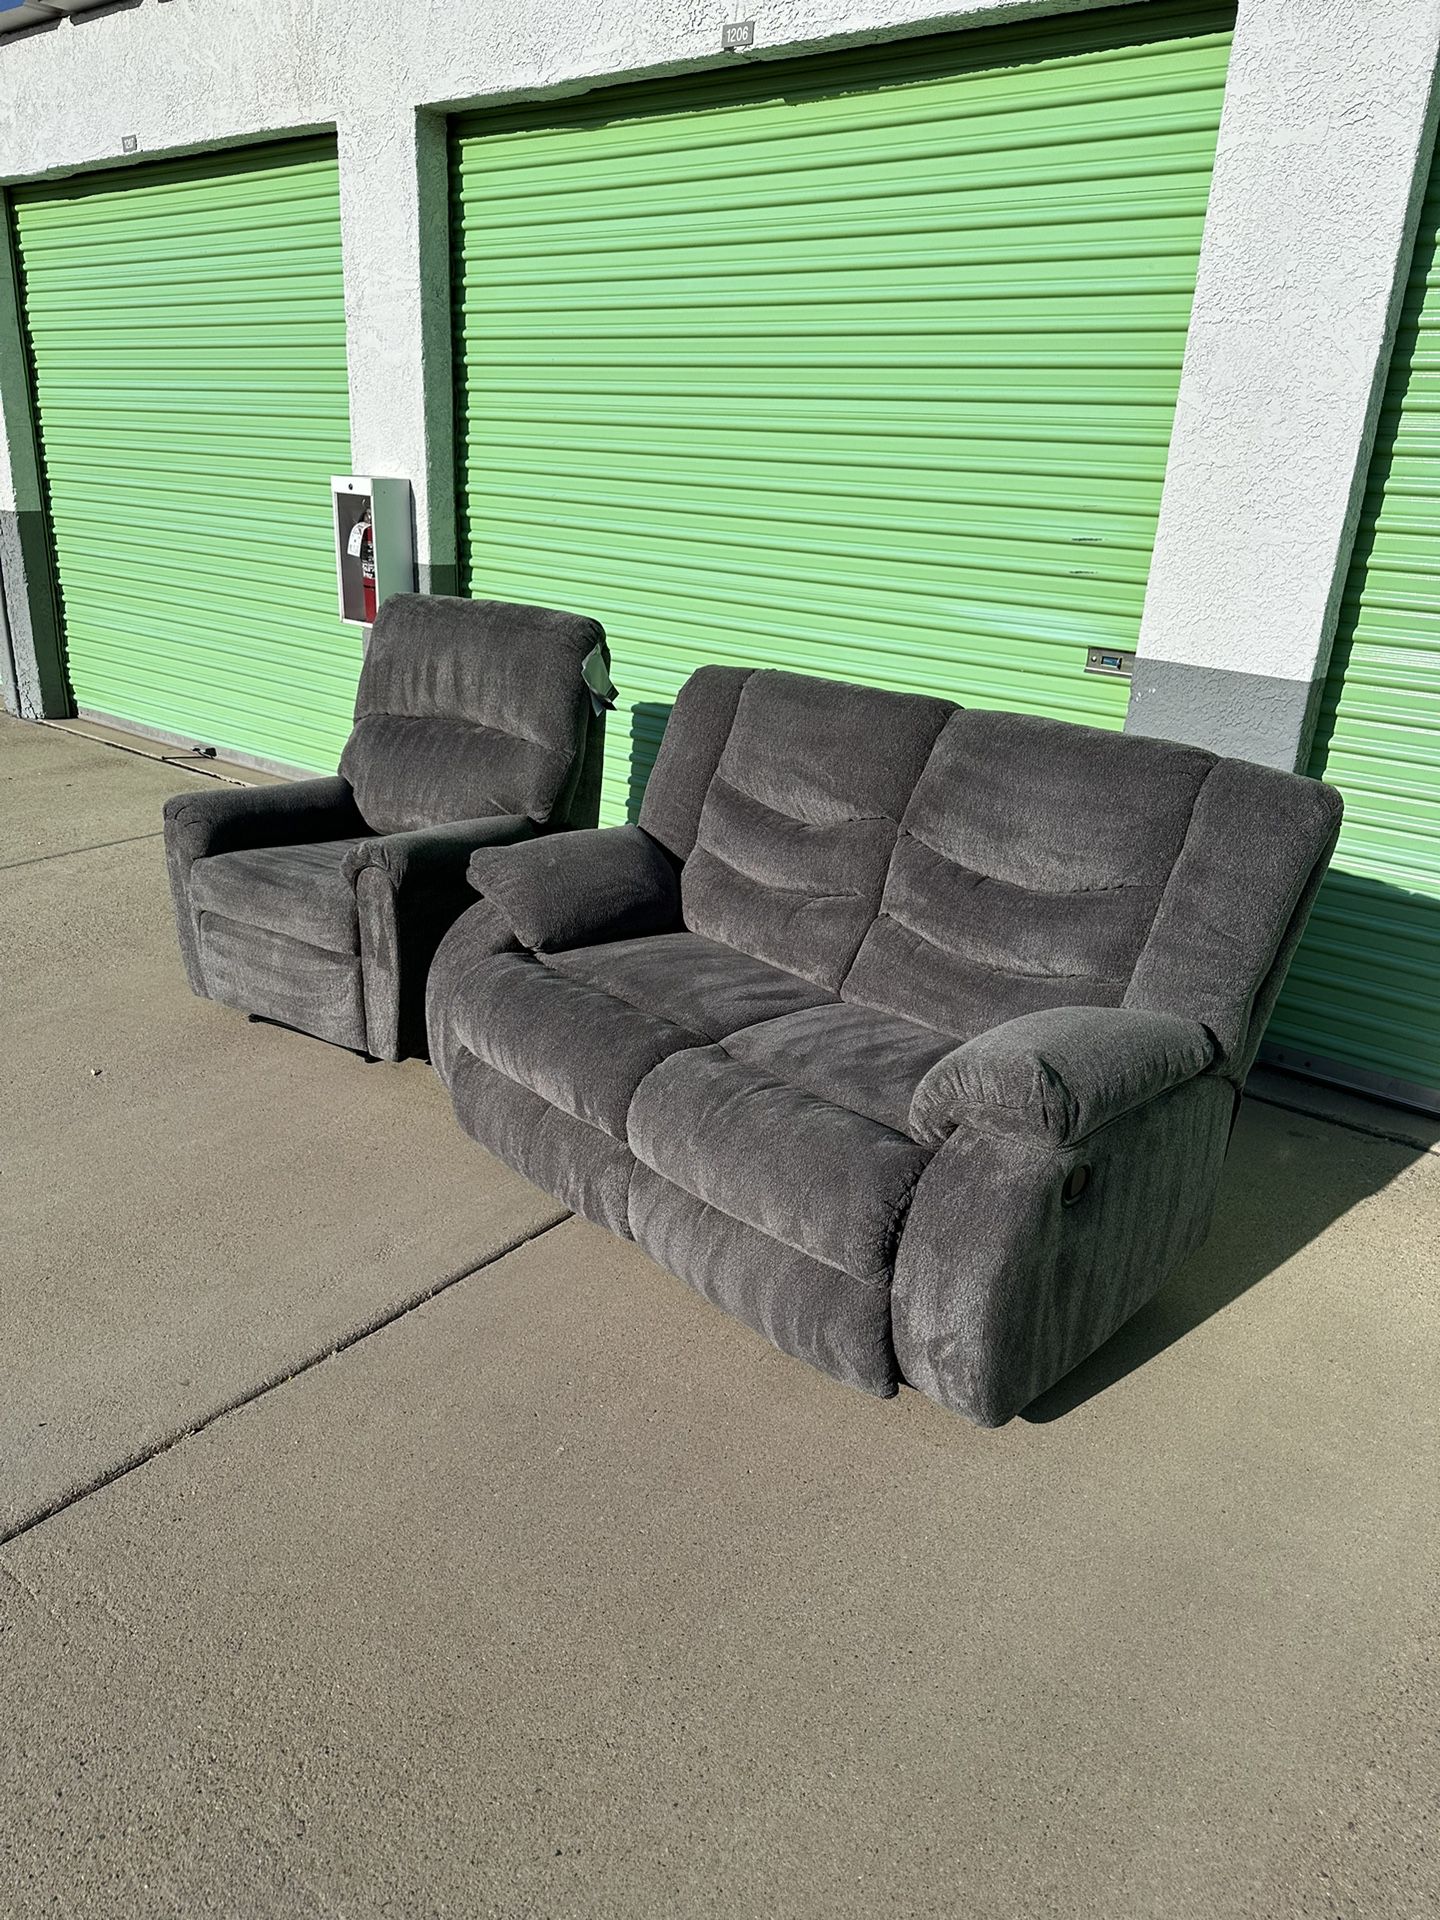 Loveseat & Recliner Set Delivery Available 